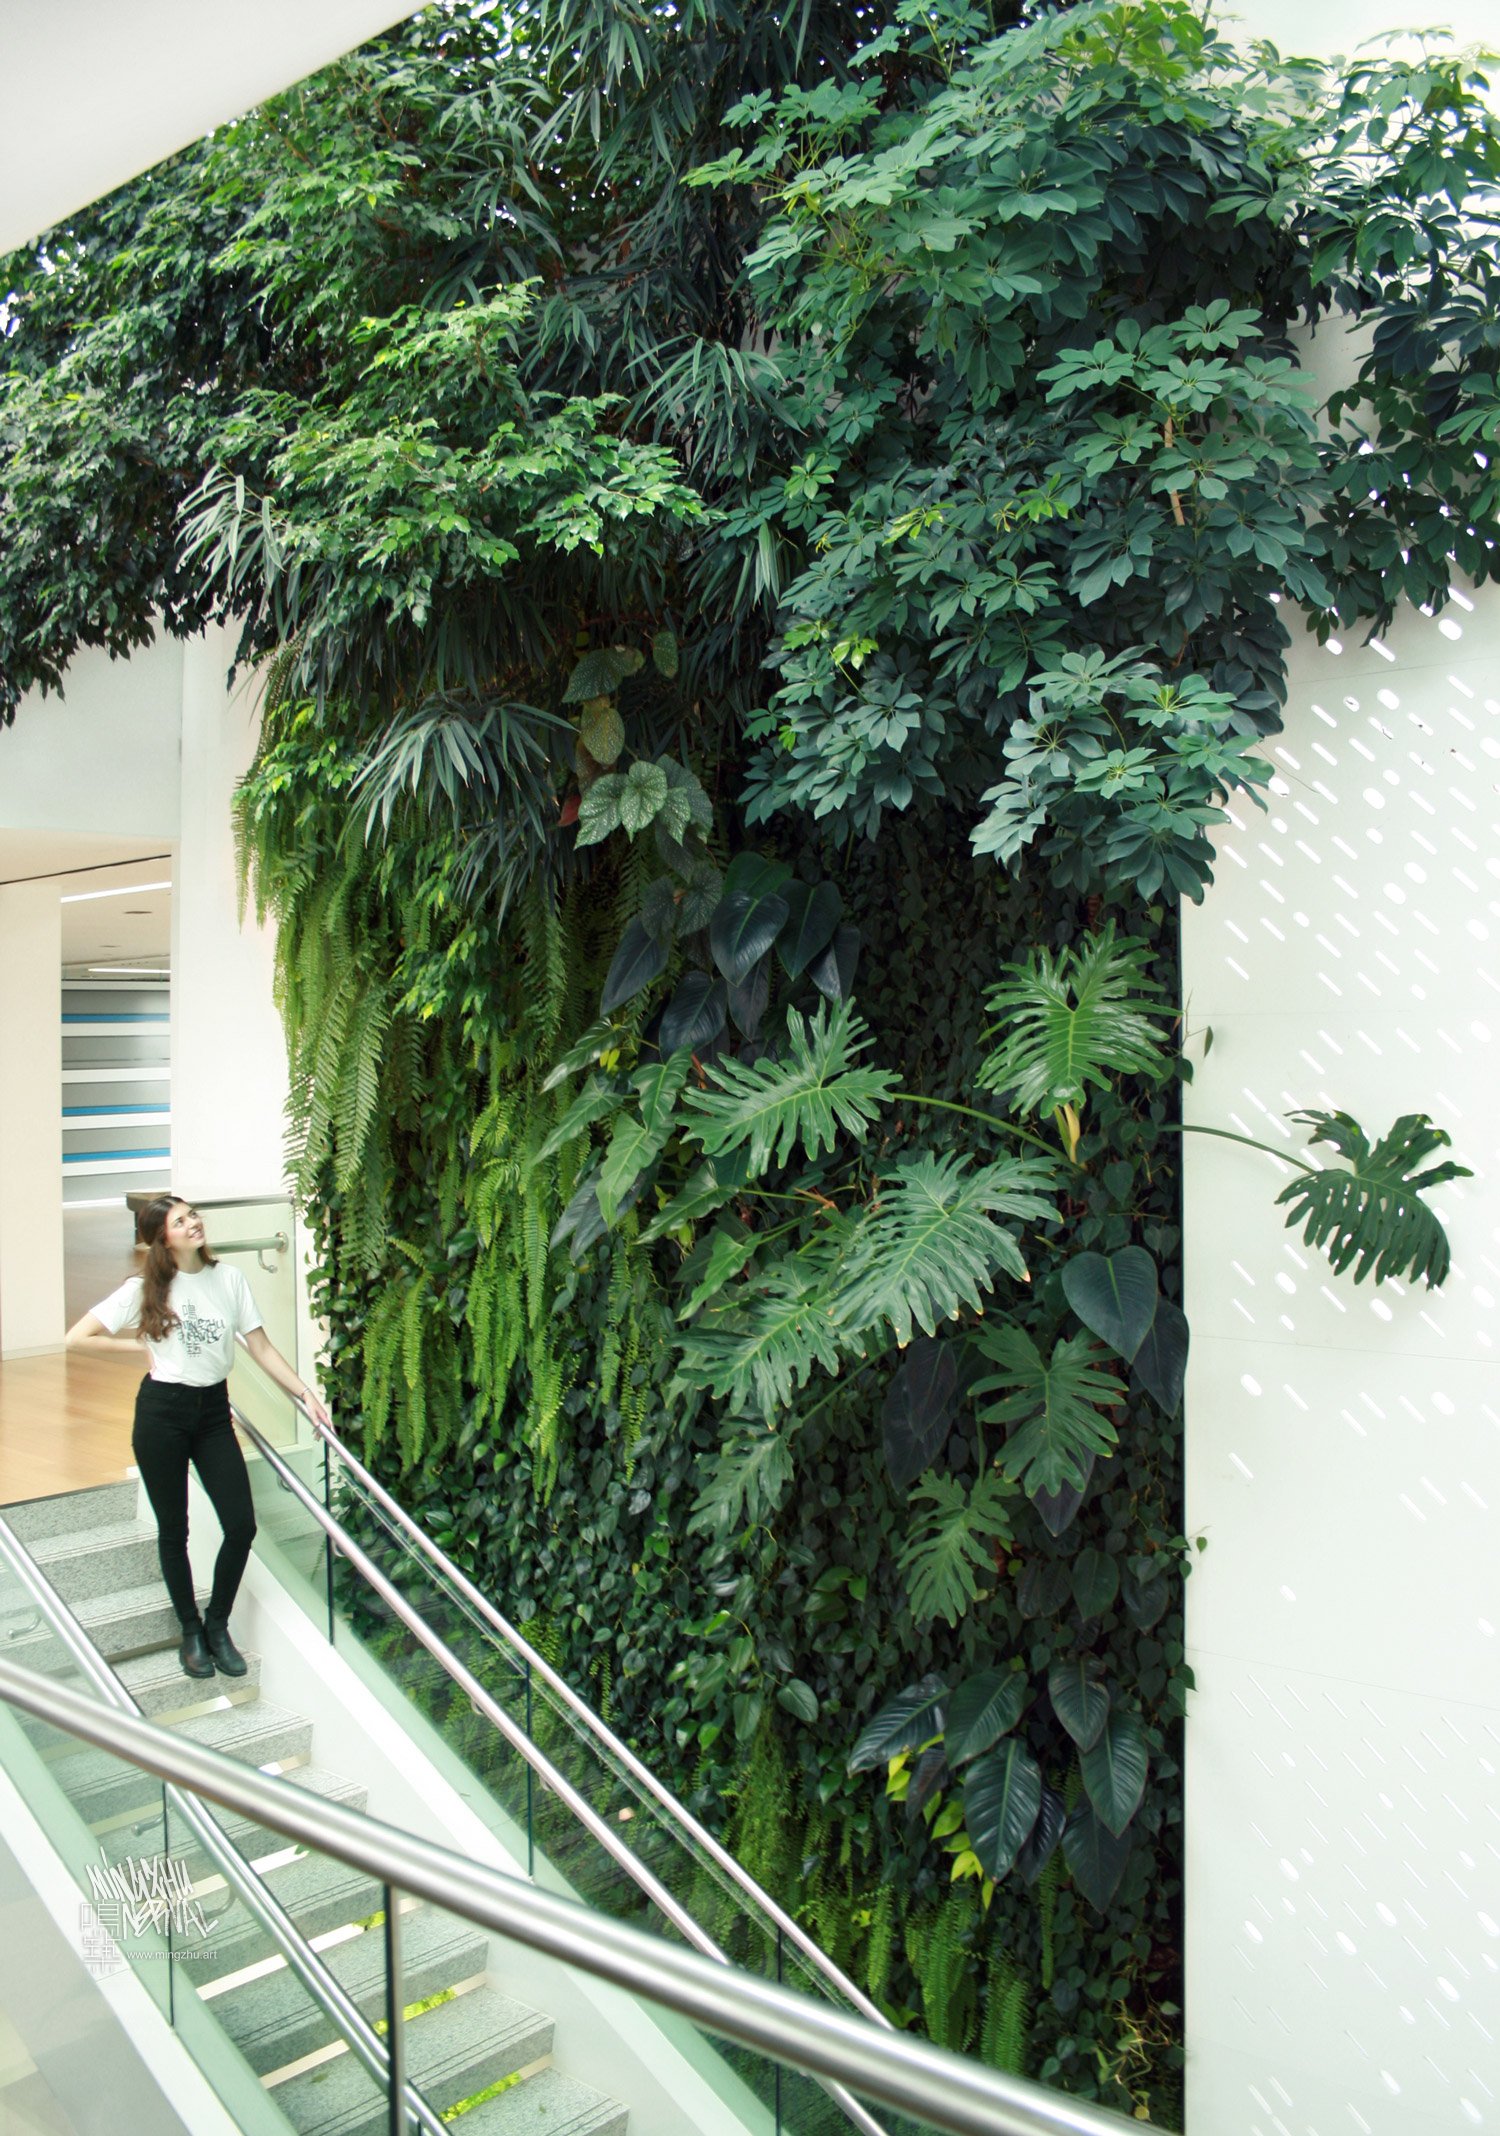 Mingzhu Nerval vertical living wall experts created the best garden design art at Nu Skin in Shanghai, 2013